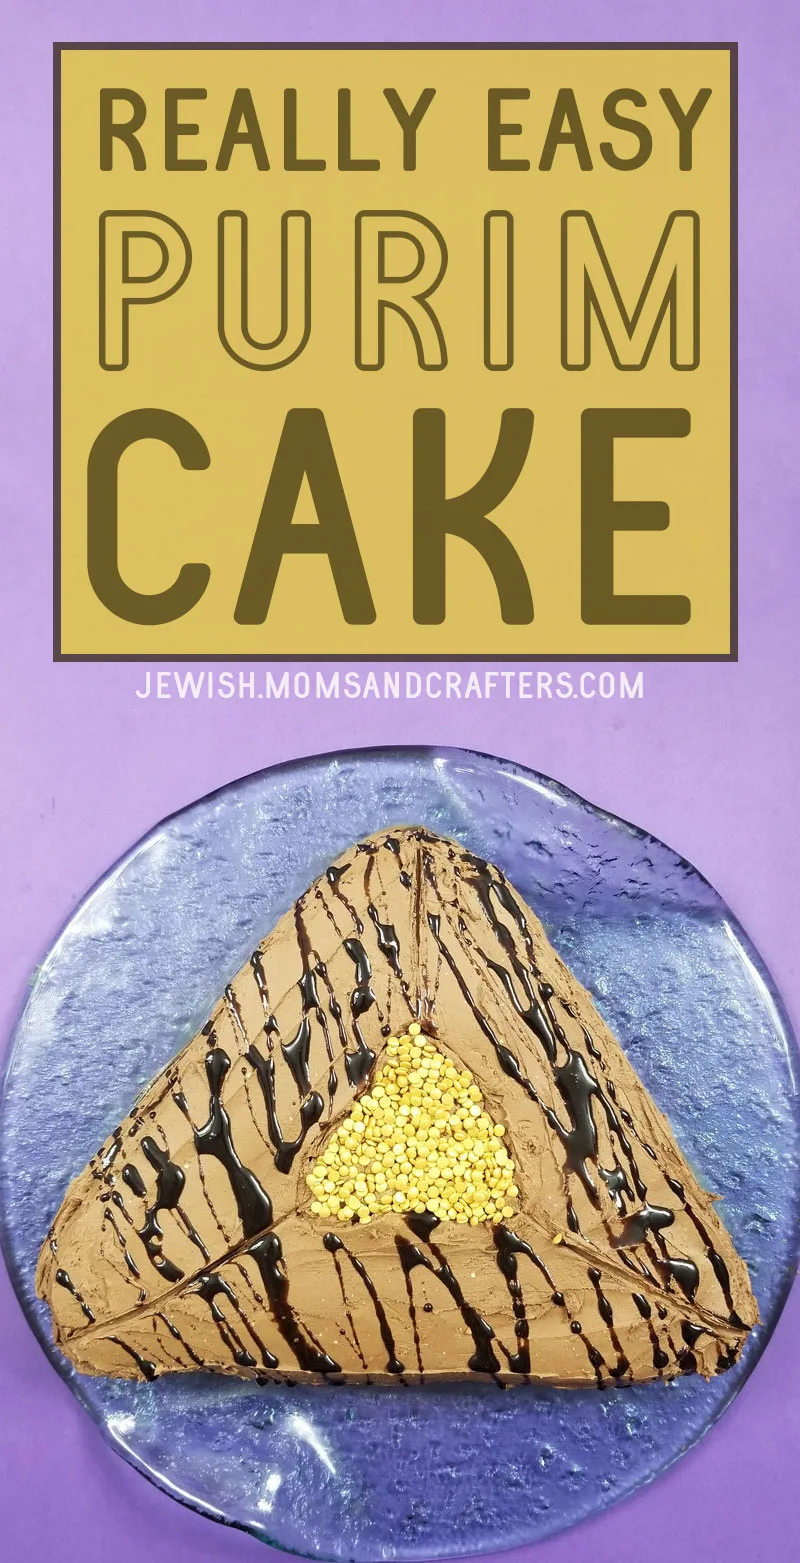 You don't need to be a pro to decorate a really easy purim cake! This cake decorating tutorial for beginners is a fantastic Purim party idea and is a great way to celebrate the Jewish holiday. No recipe needed - you can use your favorite cake or cake mix